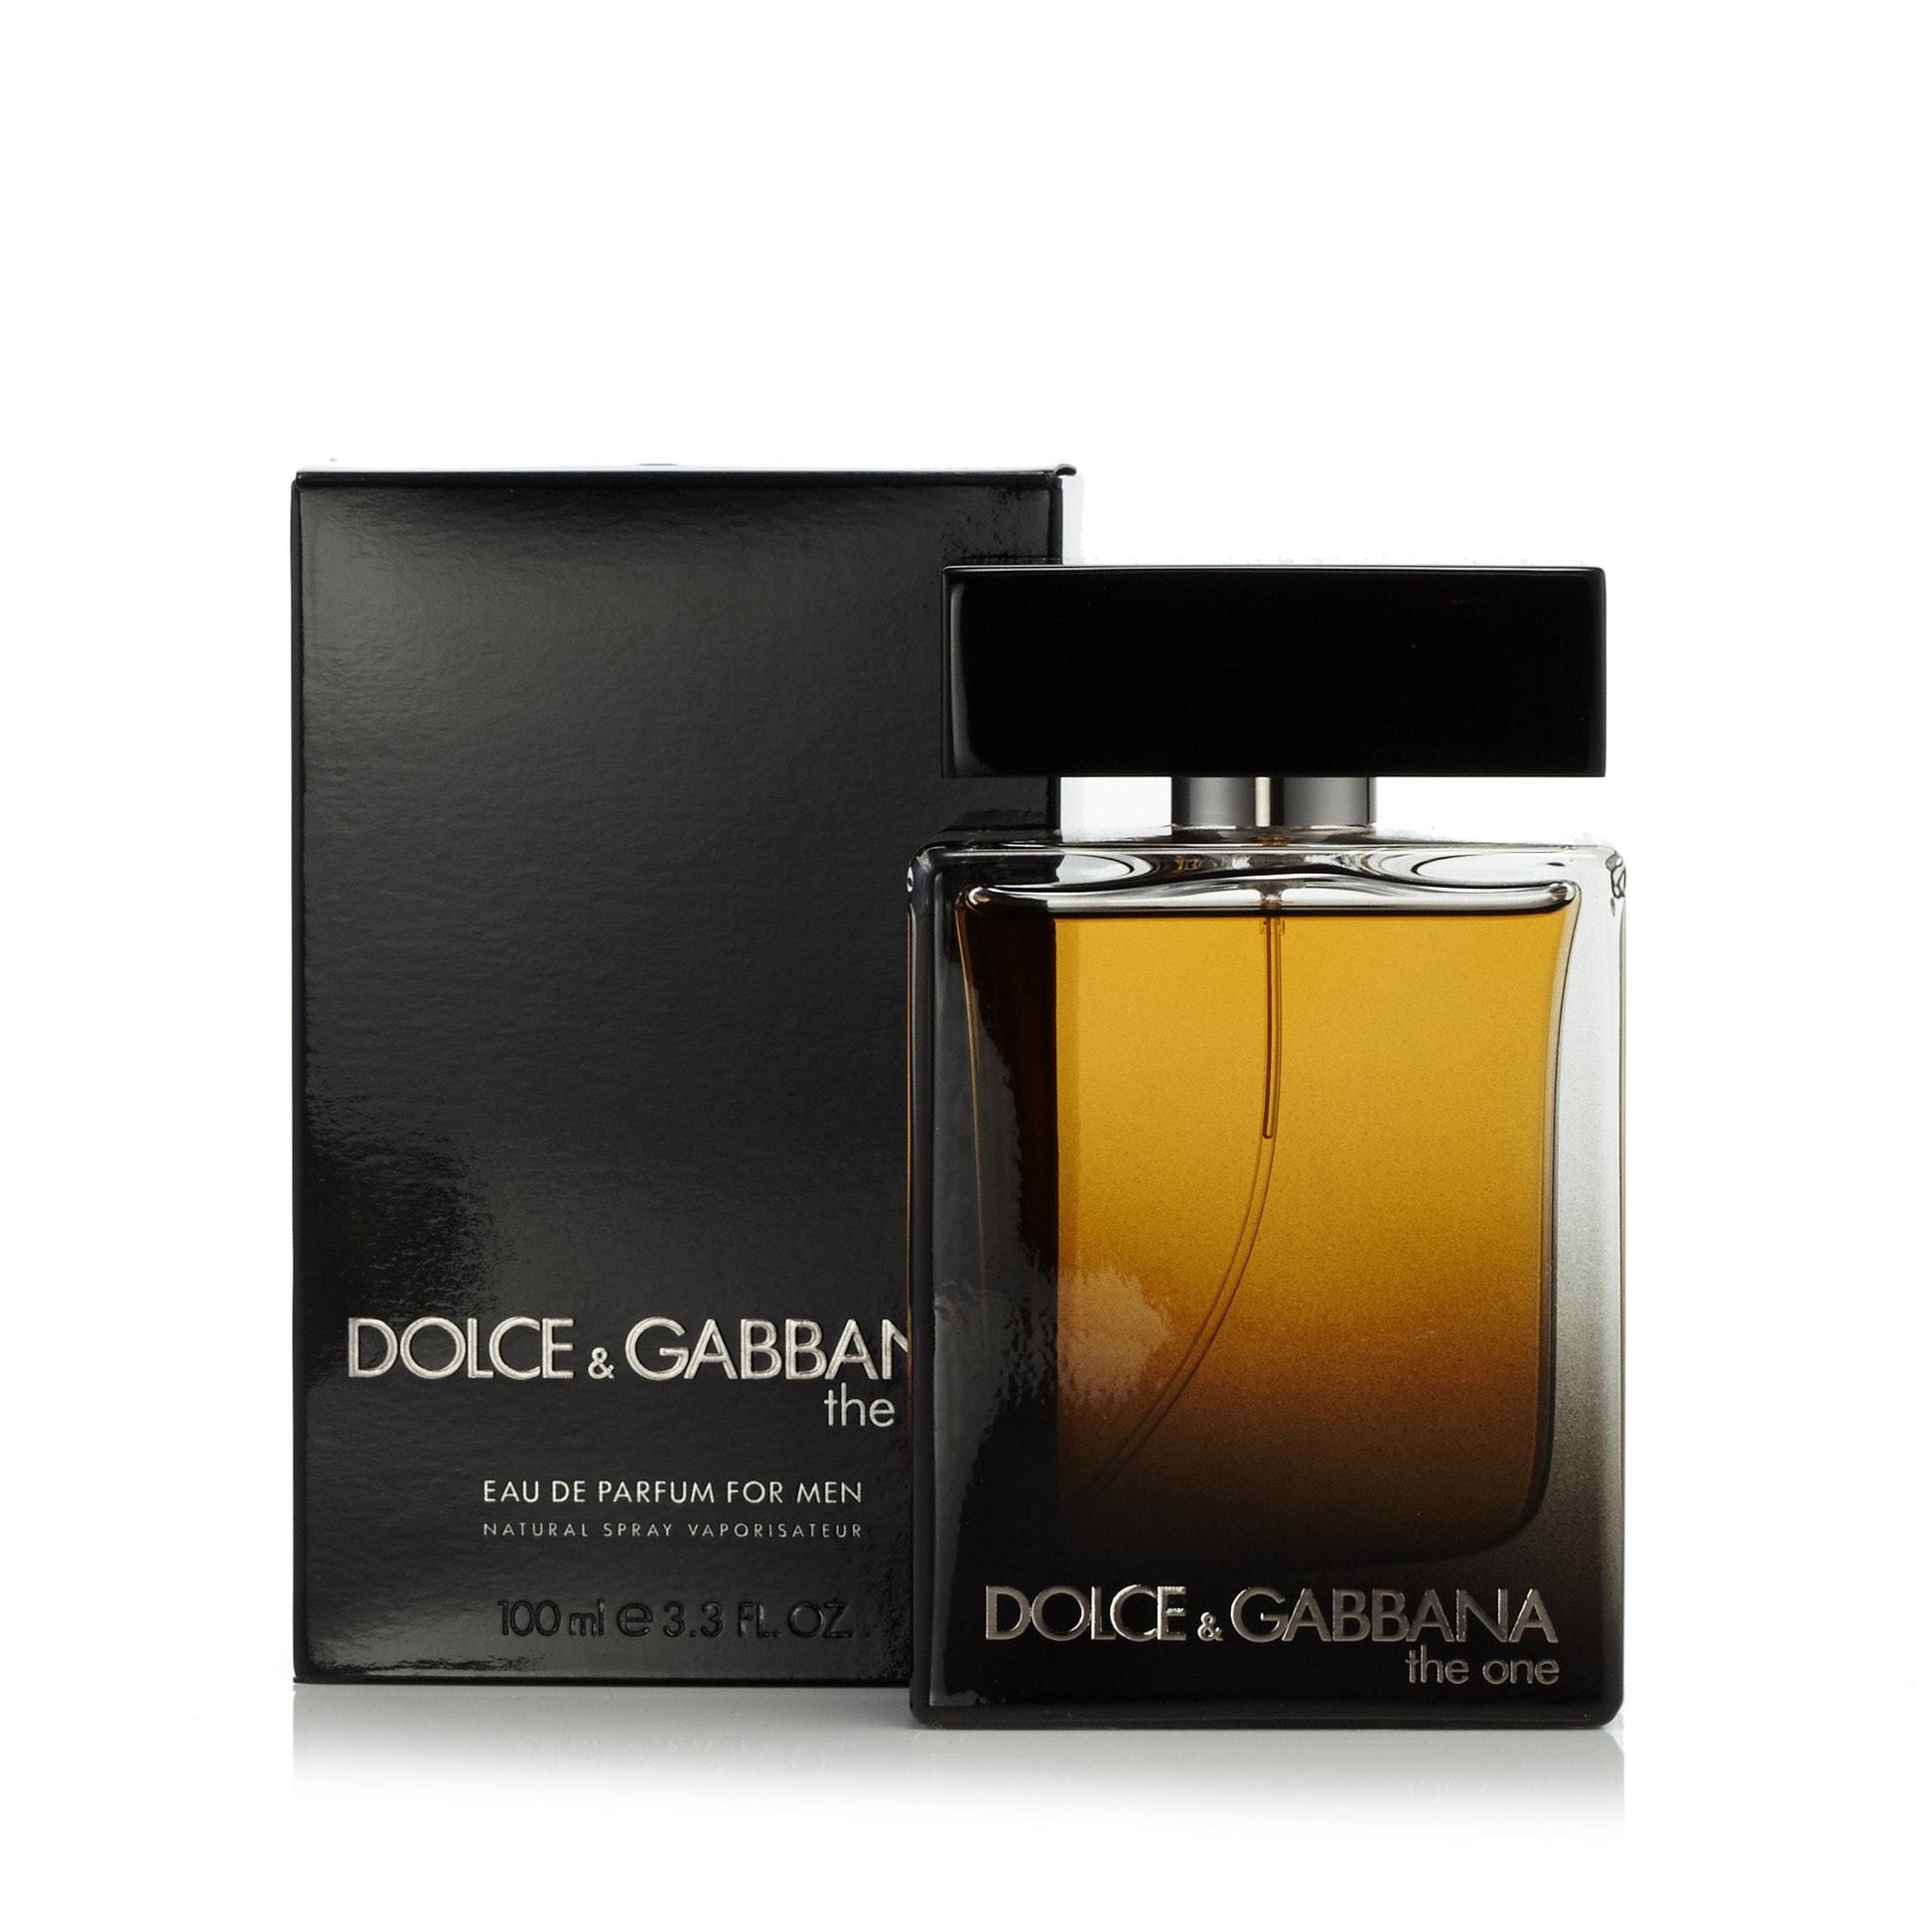 The One Eau de Parfum Spray for Men by Dolce and Gabbana, Product image 2